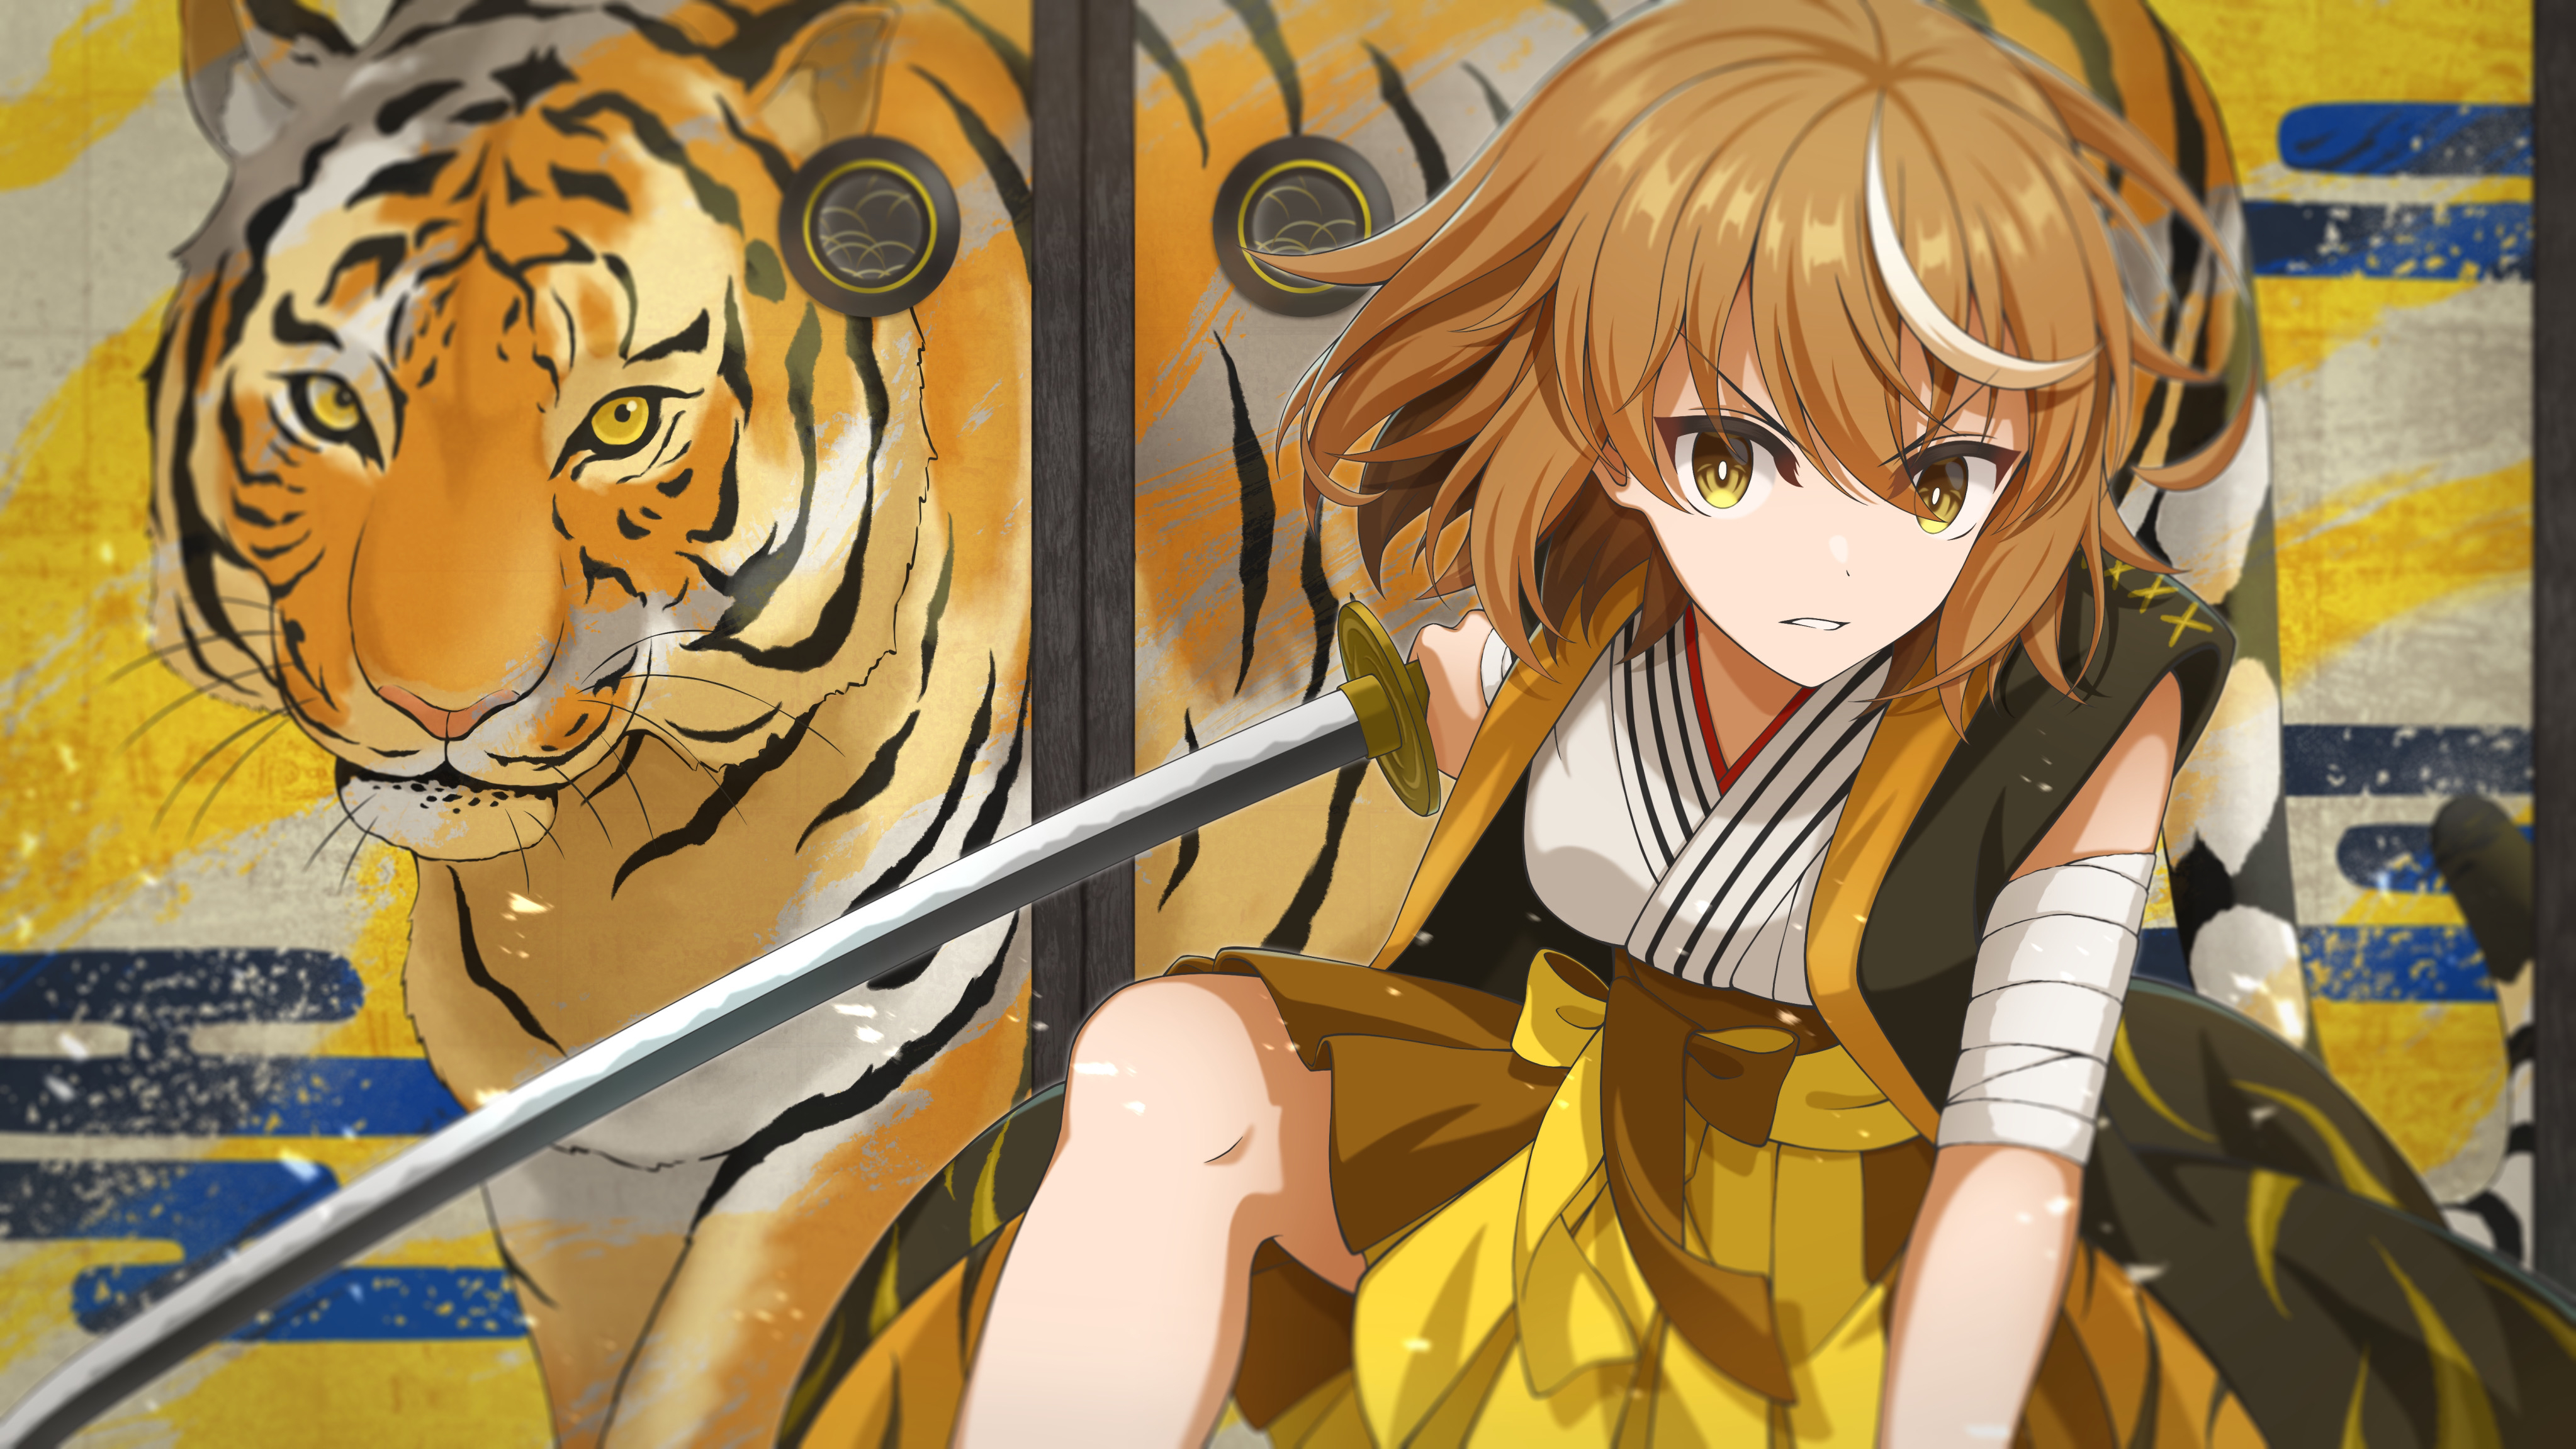 The Anime Portrait Depicts a Fierce Male Tiger Fighter, Exuding Strength  and Determination Stock Illustration - Illustration of character, anime:  292517047